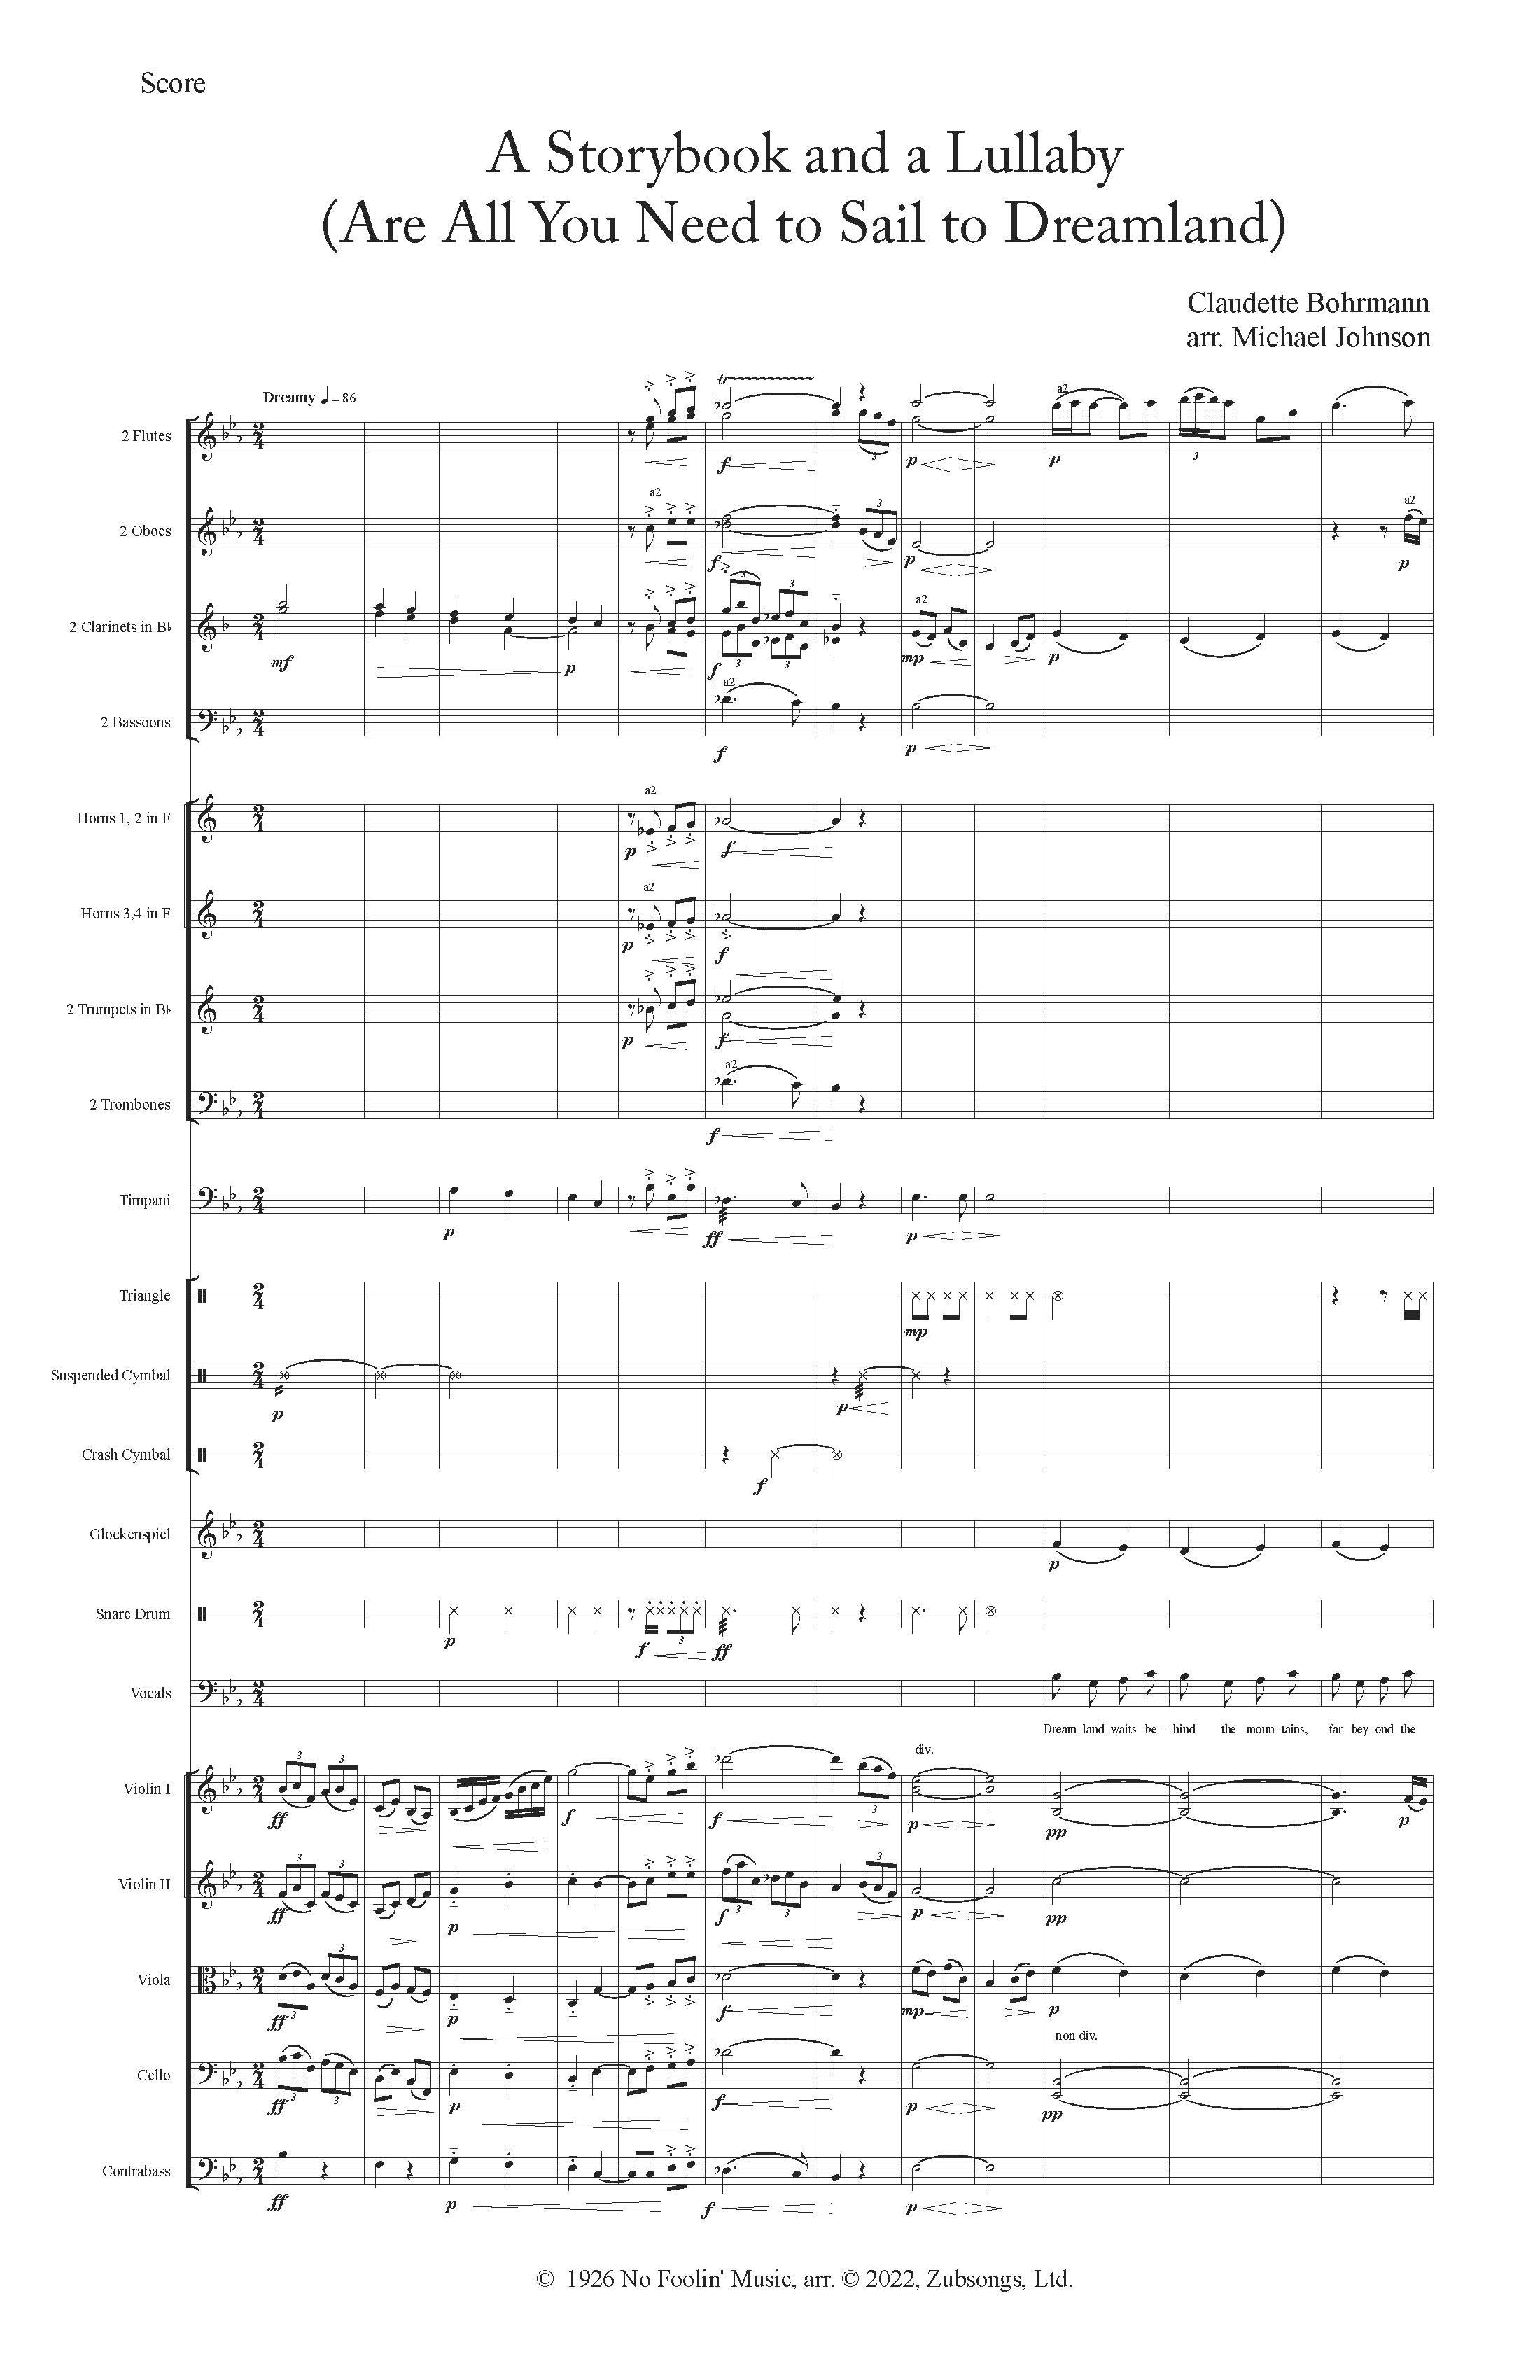 A STORYBOOK AND A LULLABY ORCH - Score_Page_01.jpg